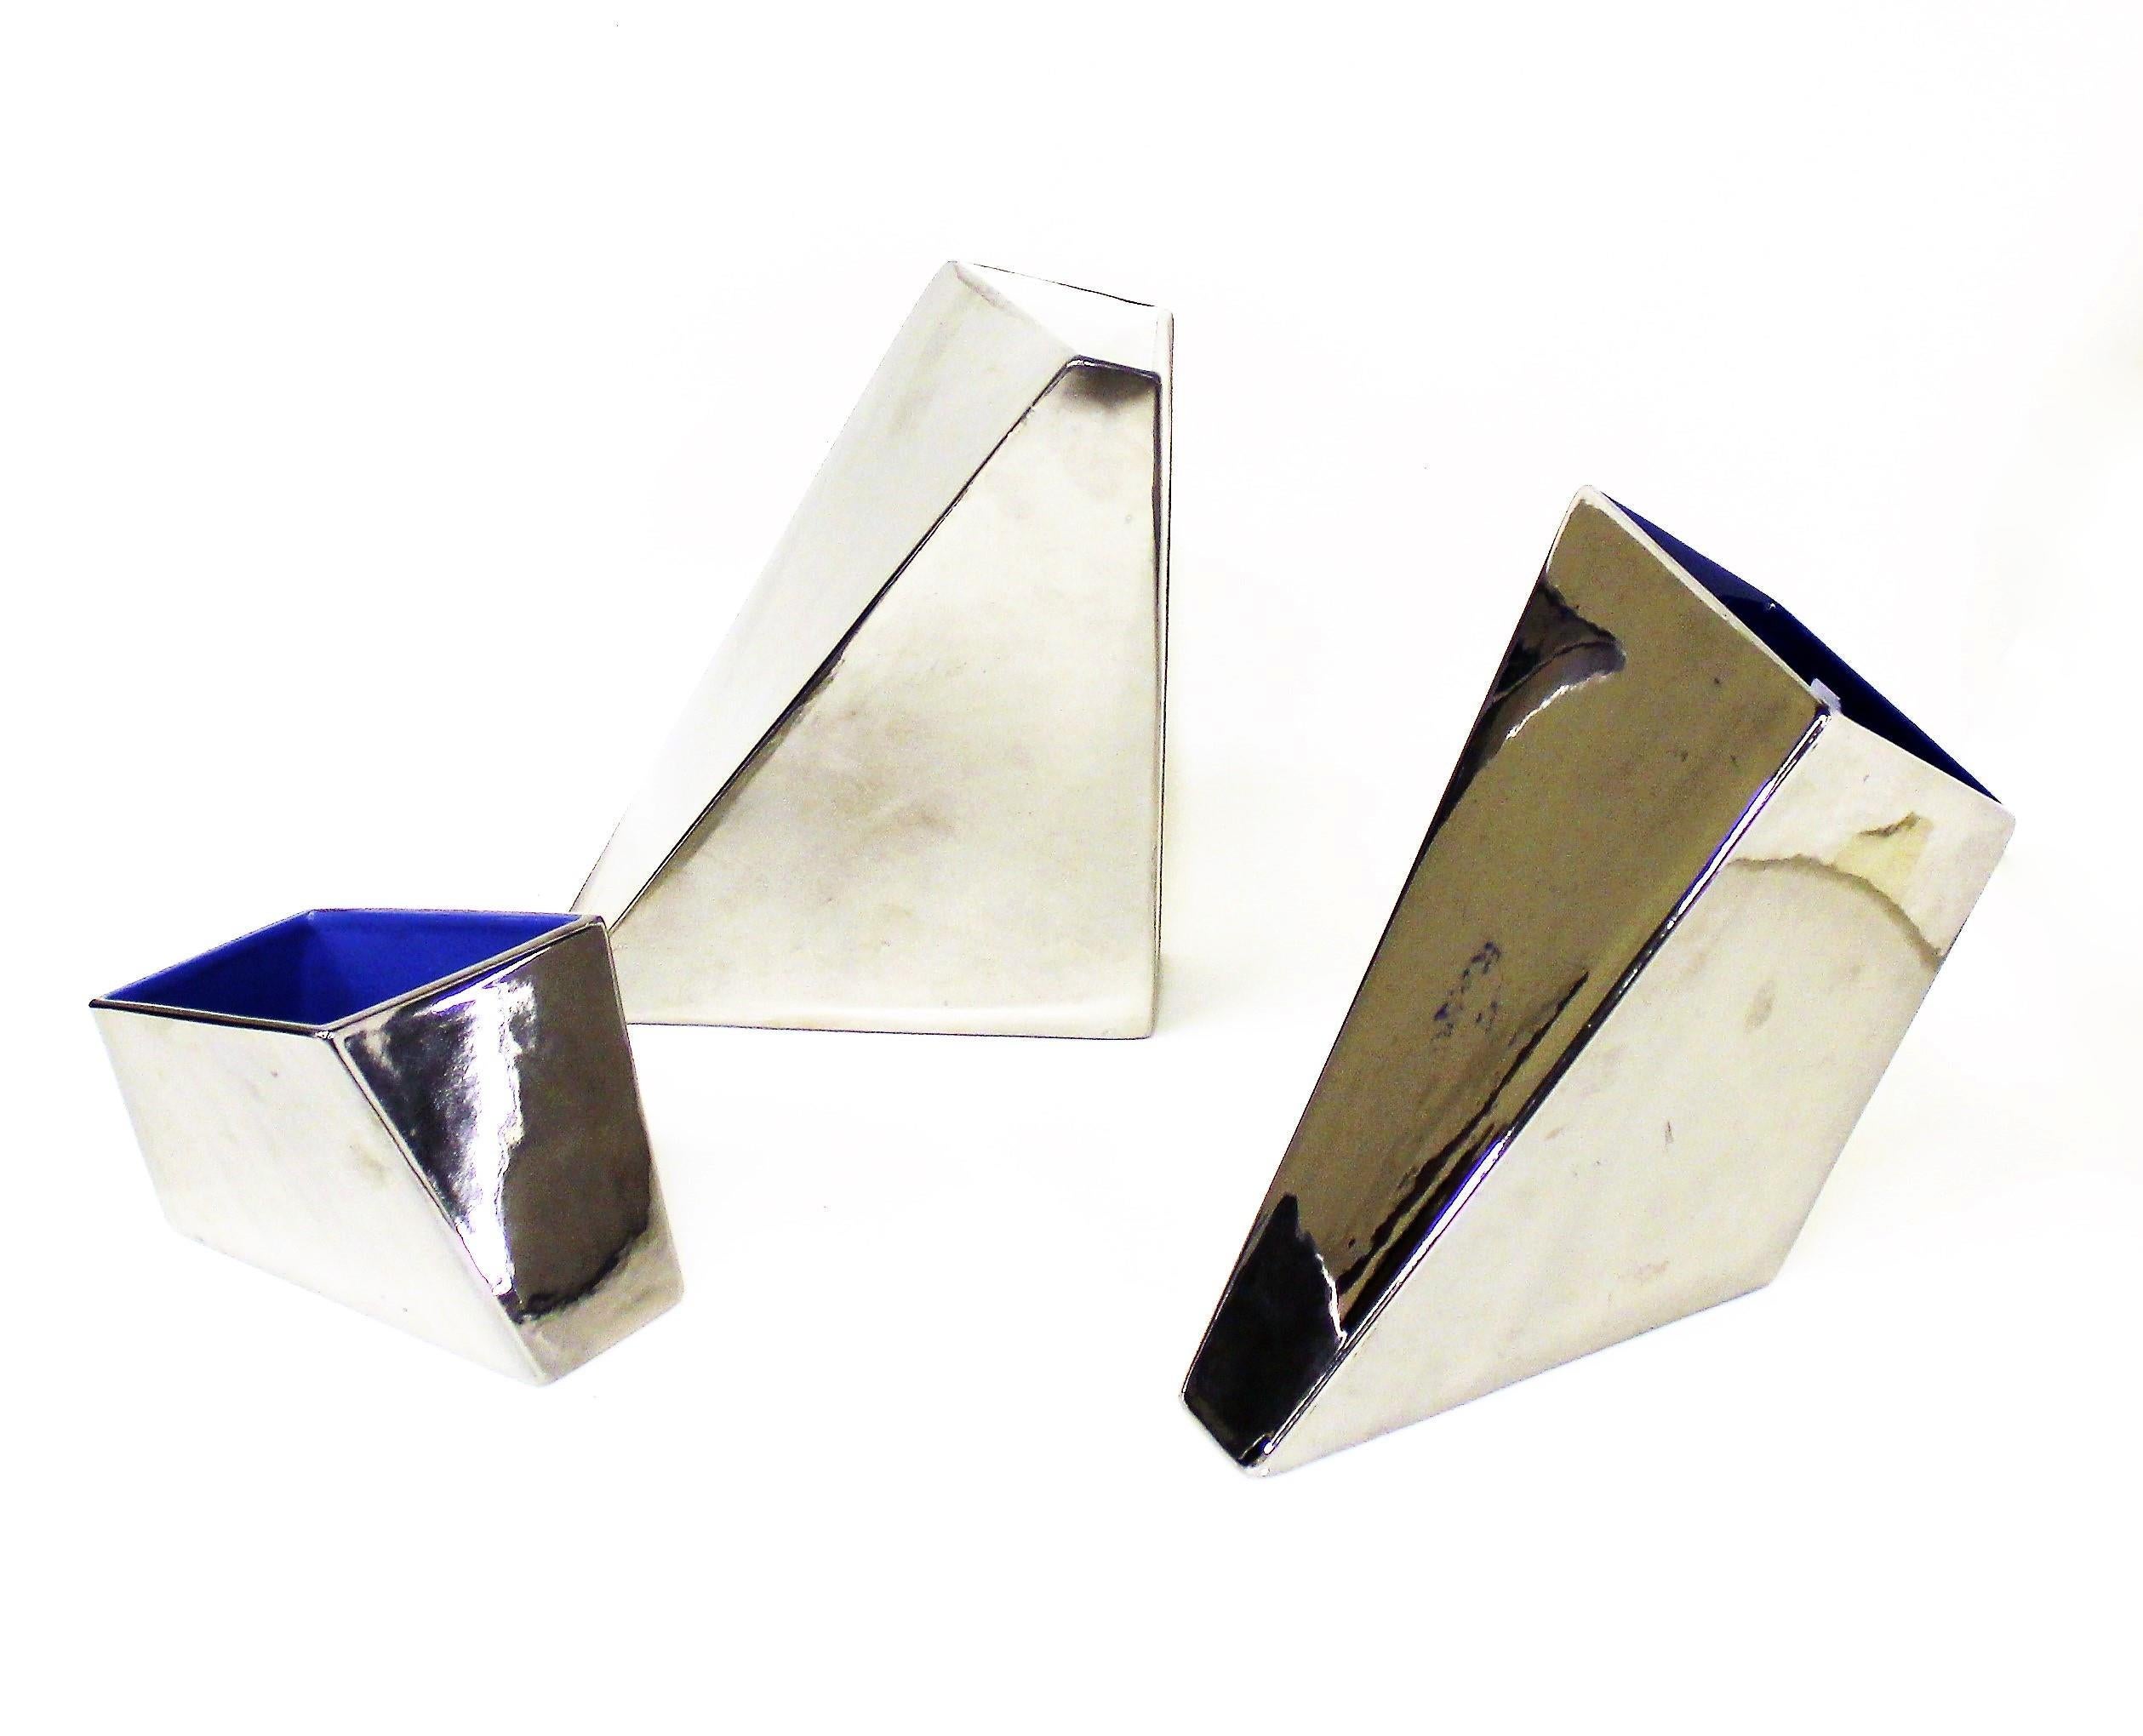 Italian 20th Century Chromed Silver Ceramic Irregular Parallelepiped Vases for Driade